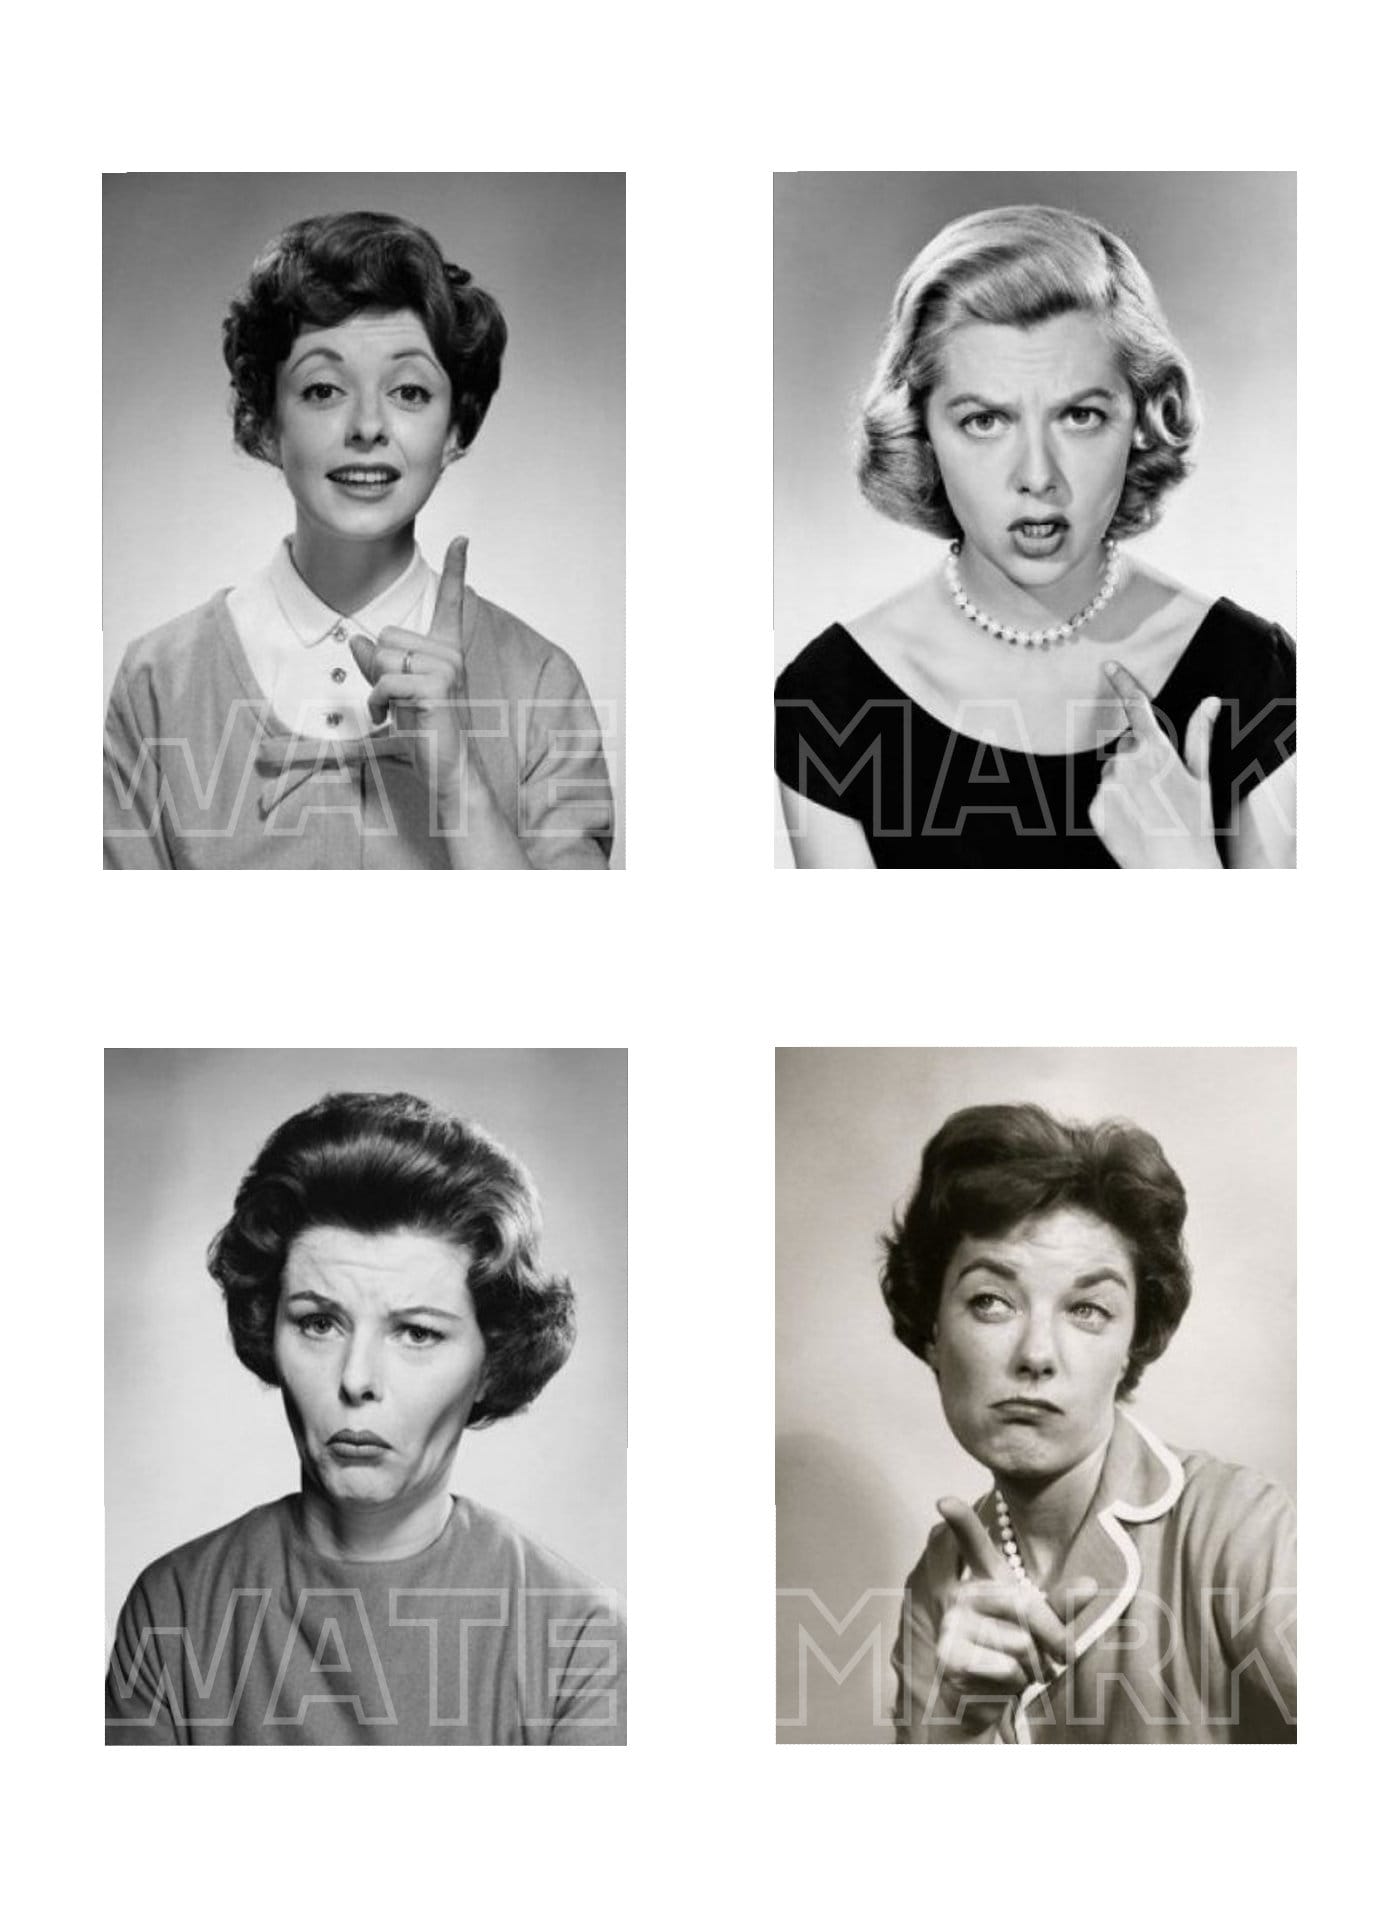 Housewife Woman Mad Angry Upset Photo Vintage 1940s 1950s picture